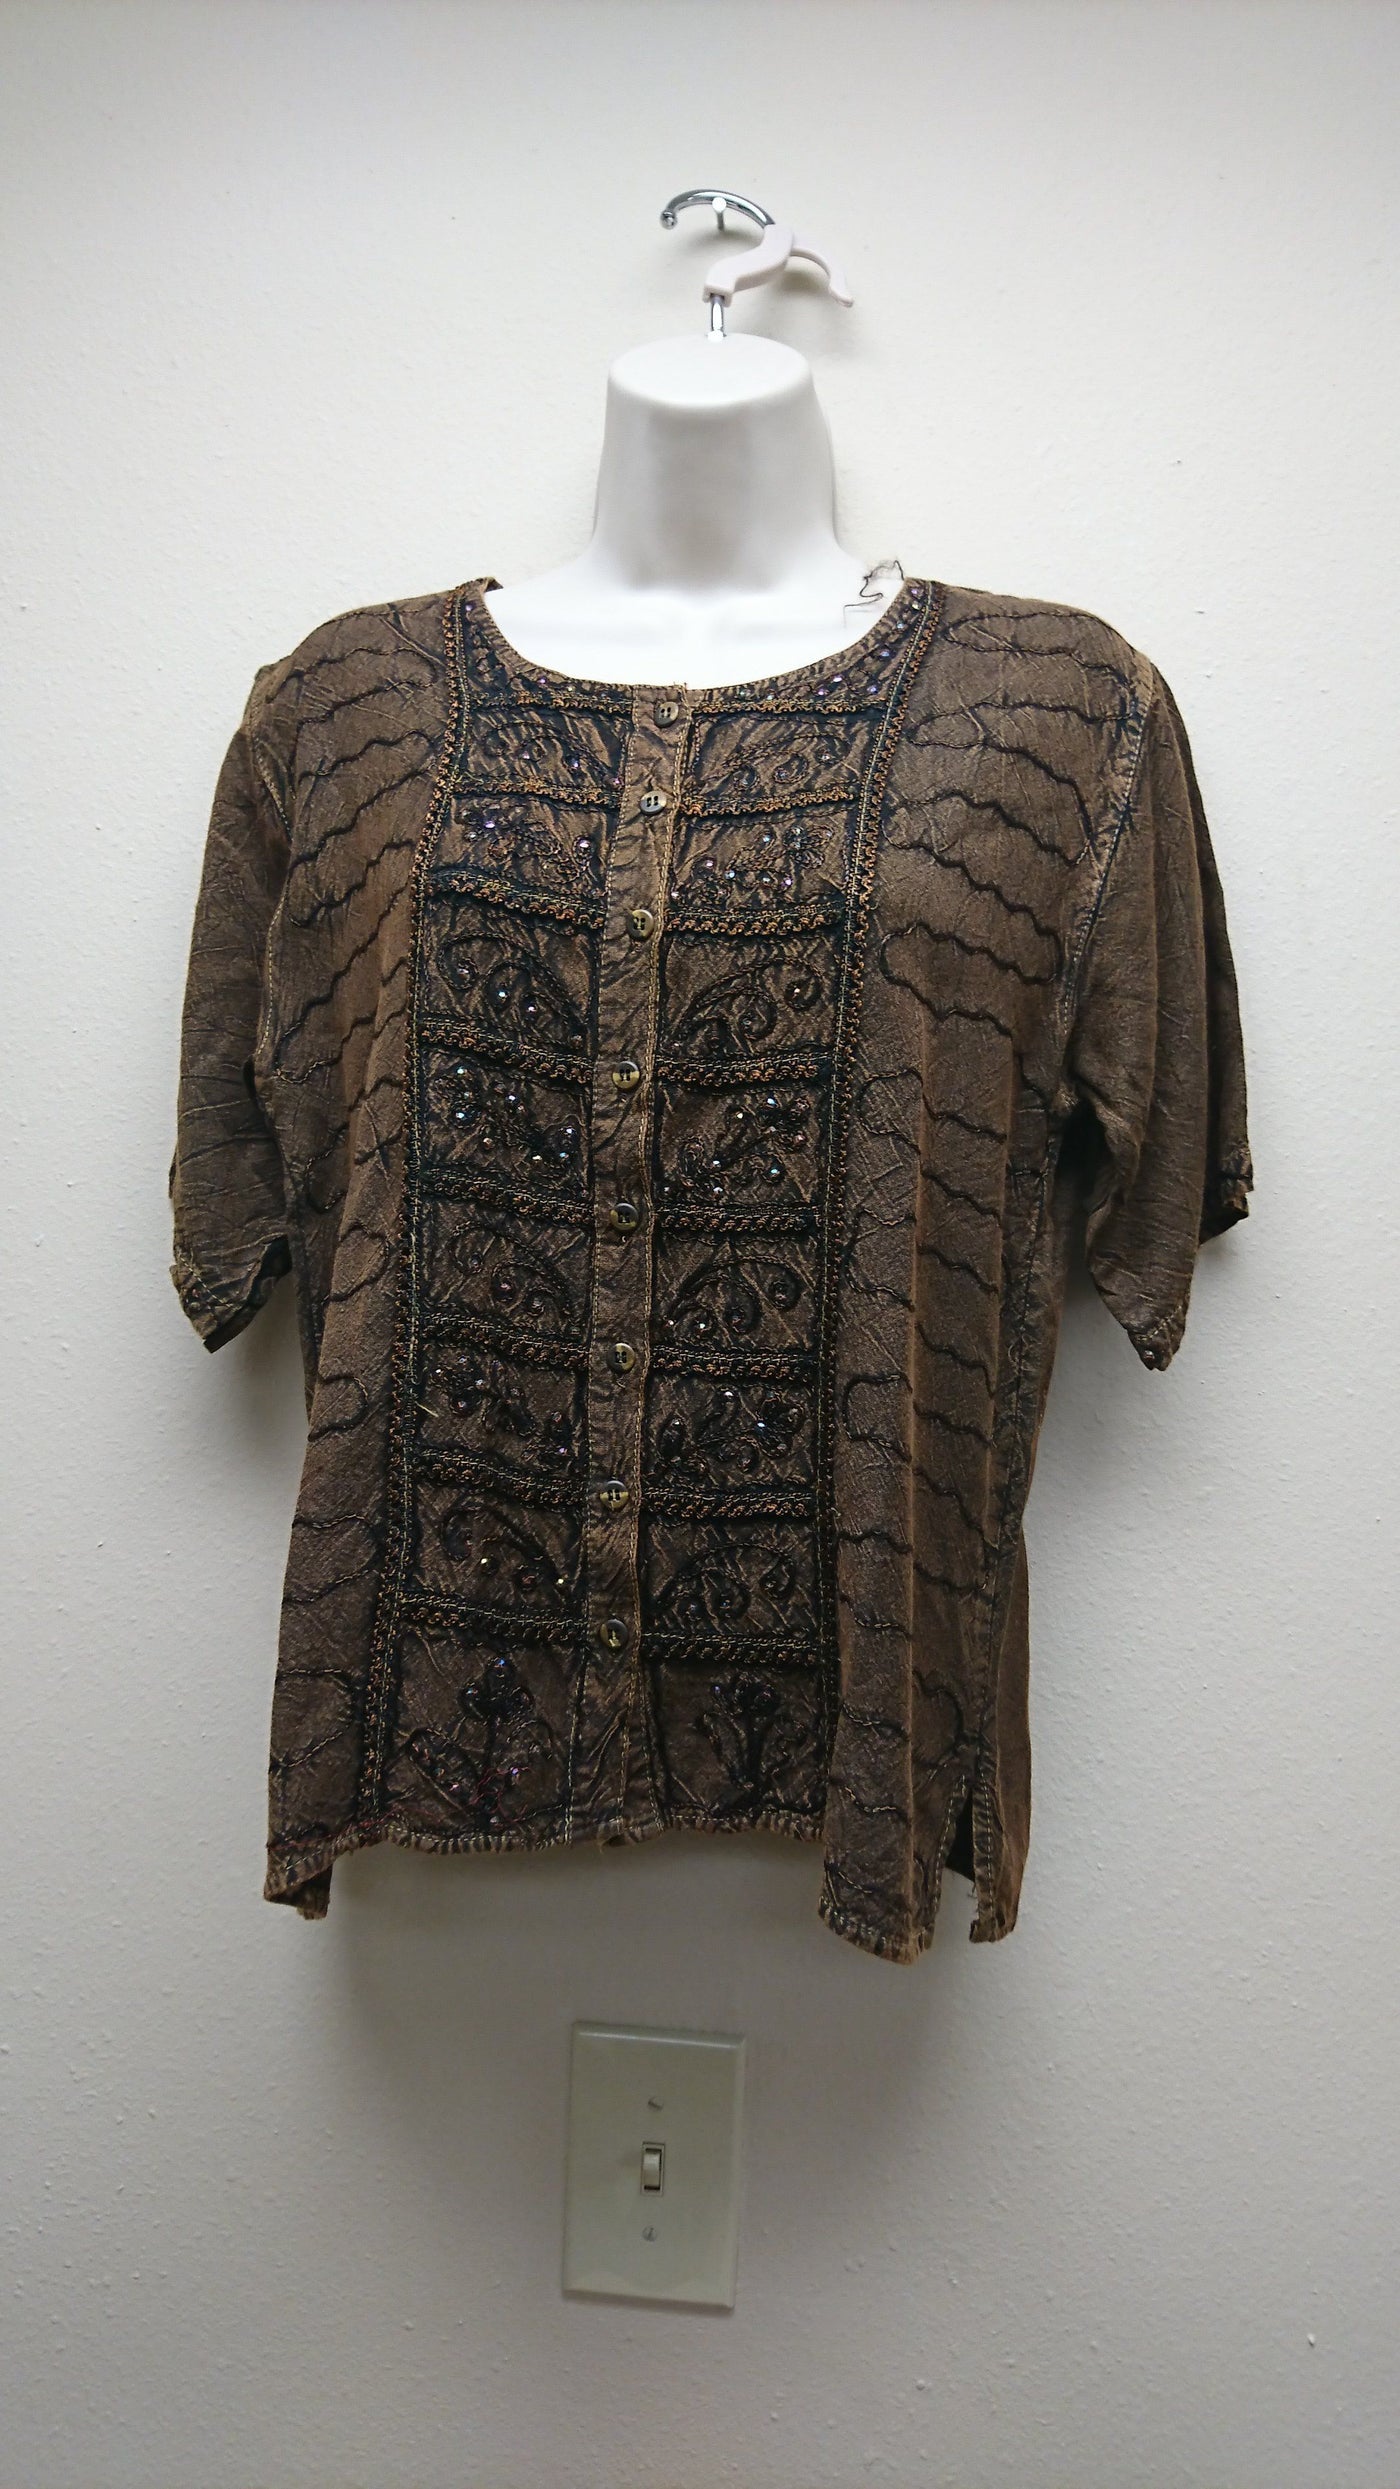 Kurti Blouse Shirt in brown - Indian Clothing in Denver, CO, Aurora, CO, Boulder, CO, Fort Collins, CO, Colorado Springs, CO, Parker, CO, Highlands Ranch, CO, Cherry Creek, CO, Centennial, CO, and Longmont, CO. Nationwide shipping USA - India Fashion X